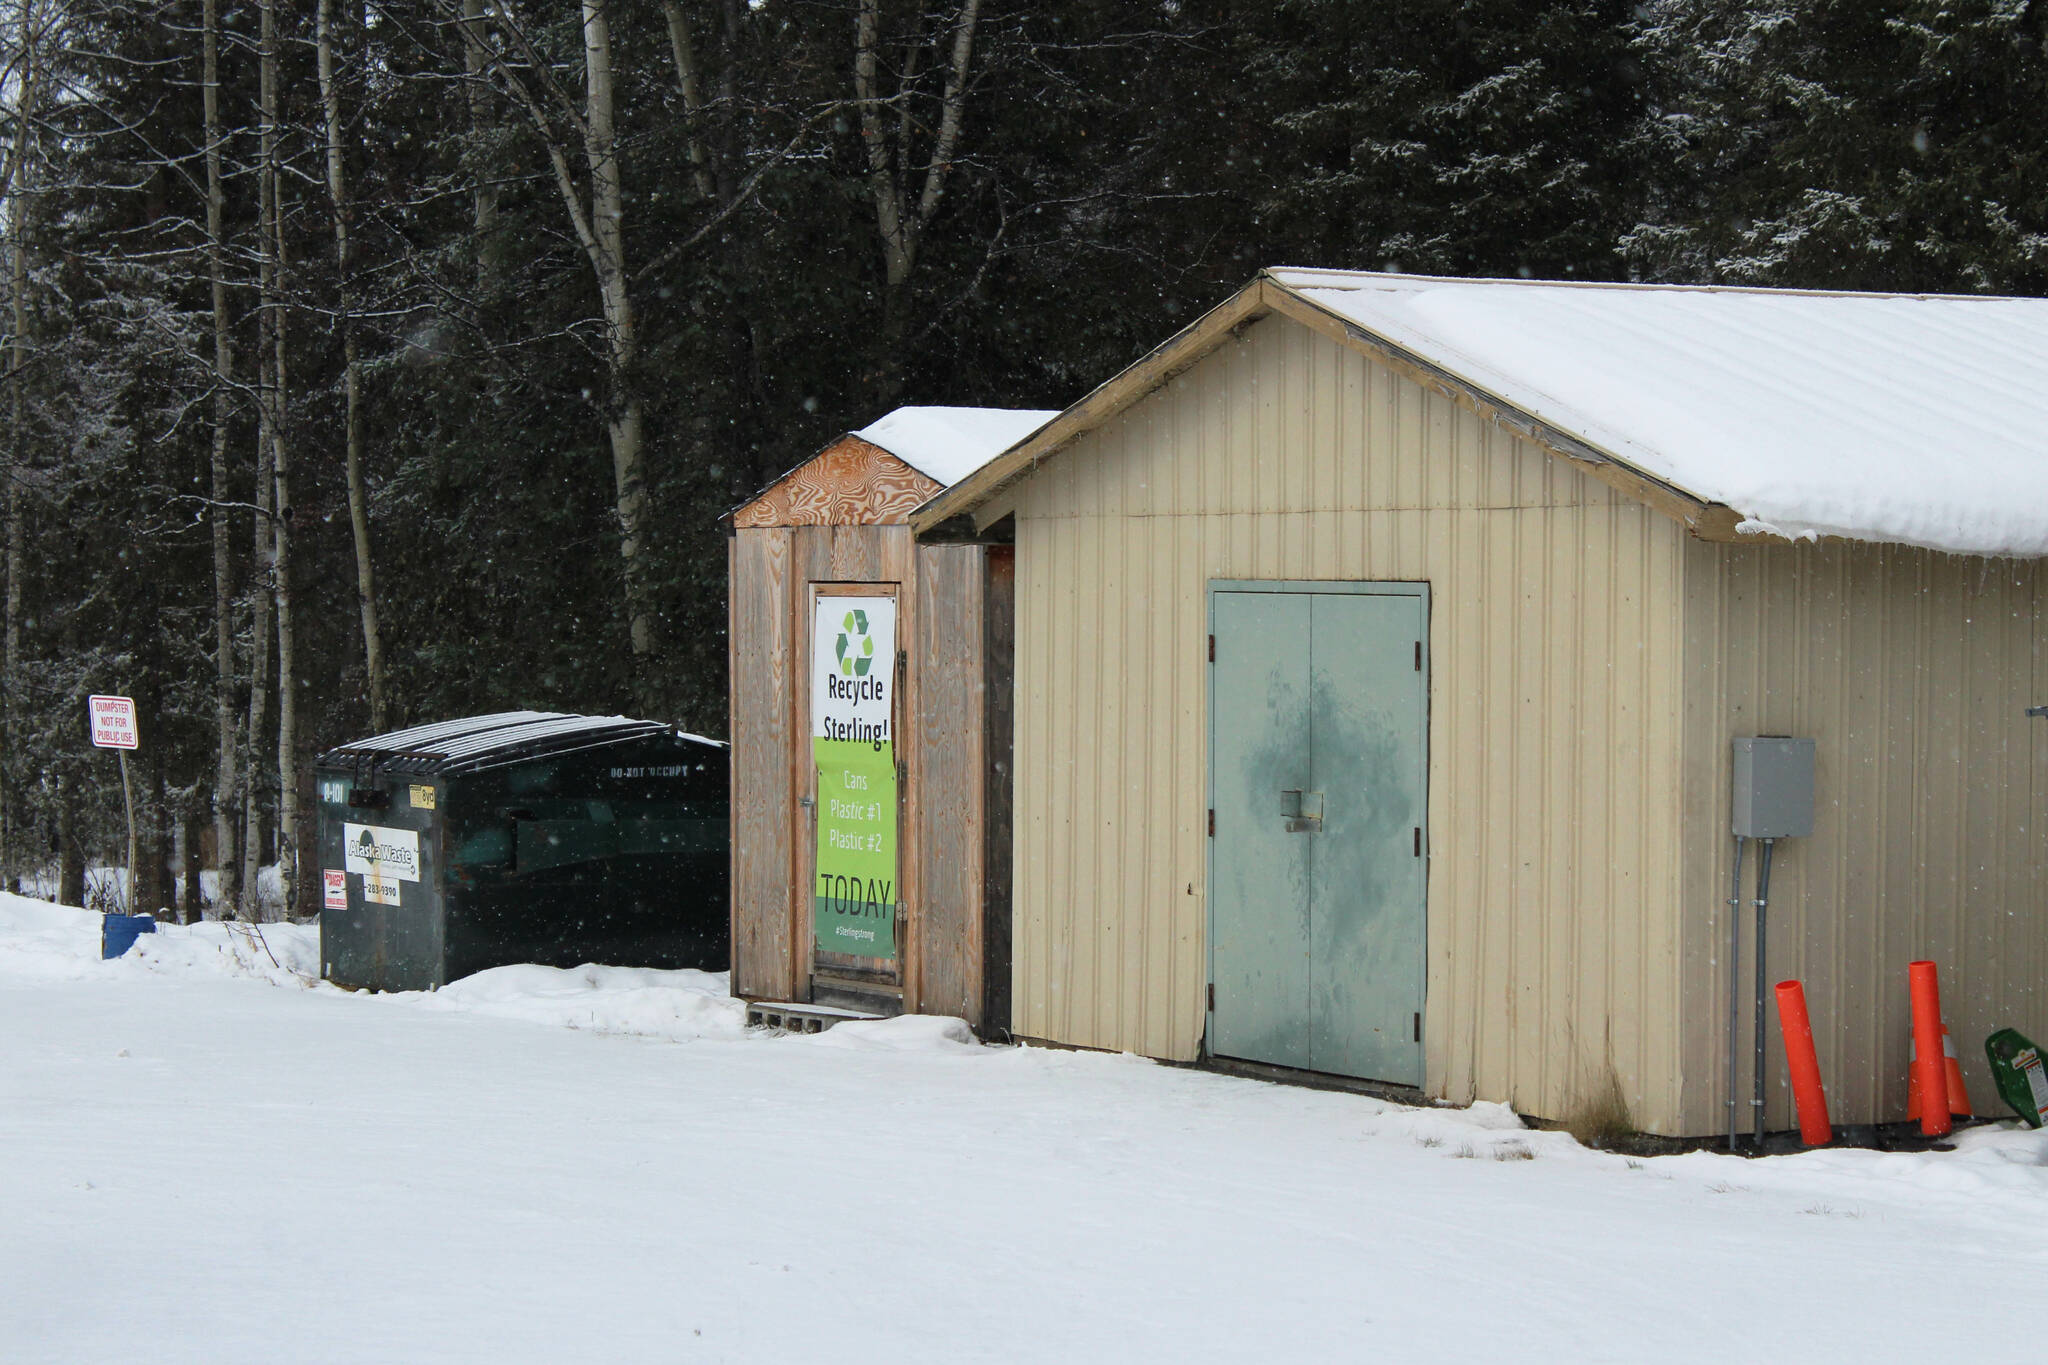 Snow falls on a recycling shed outside of Sterling Elementary School on Thursday, Nov. 10, 2022 in Sterling, Alaska. (Ashlyn O’Hara/Peninsula Clarion)